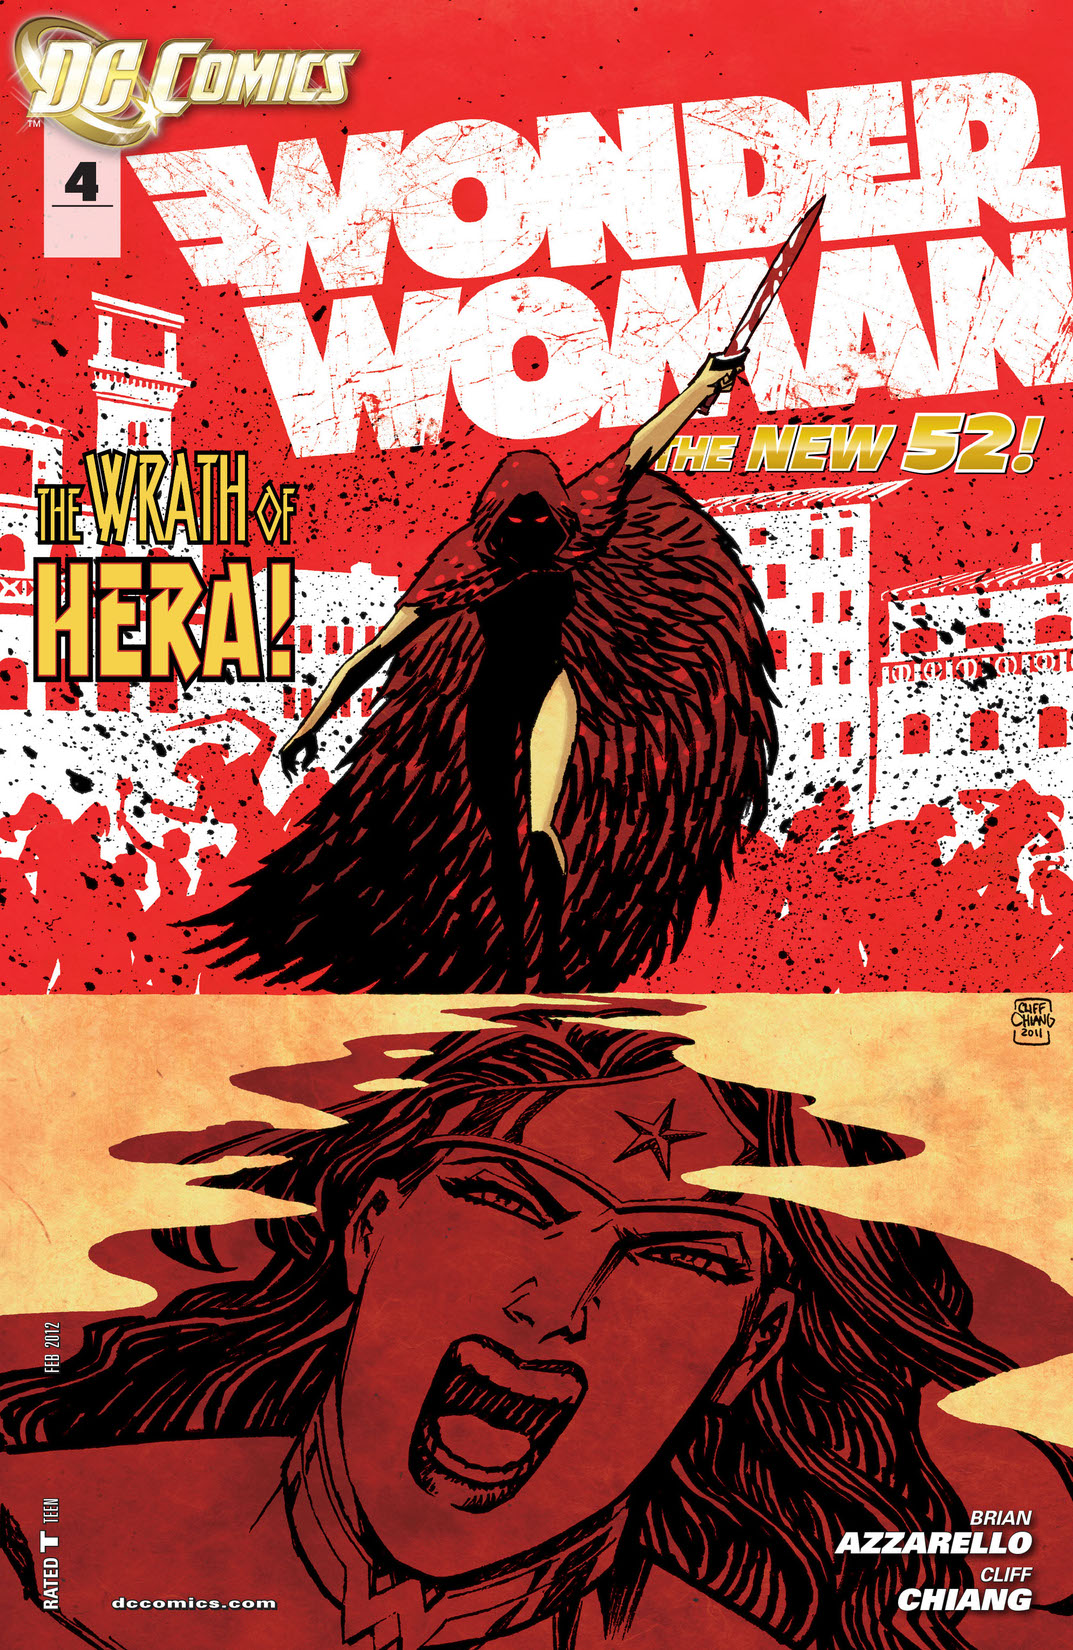 Wonder Woman (2011-) #4 preview images